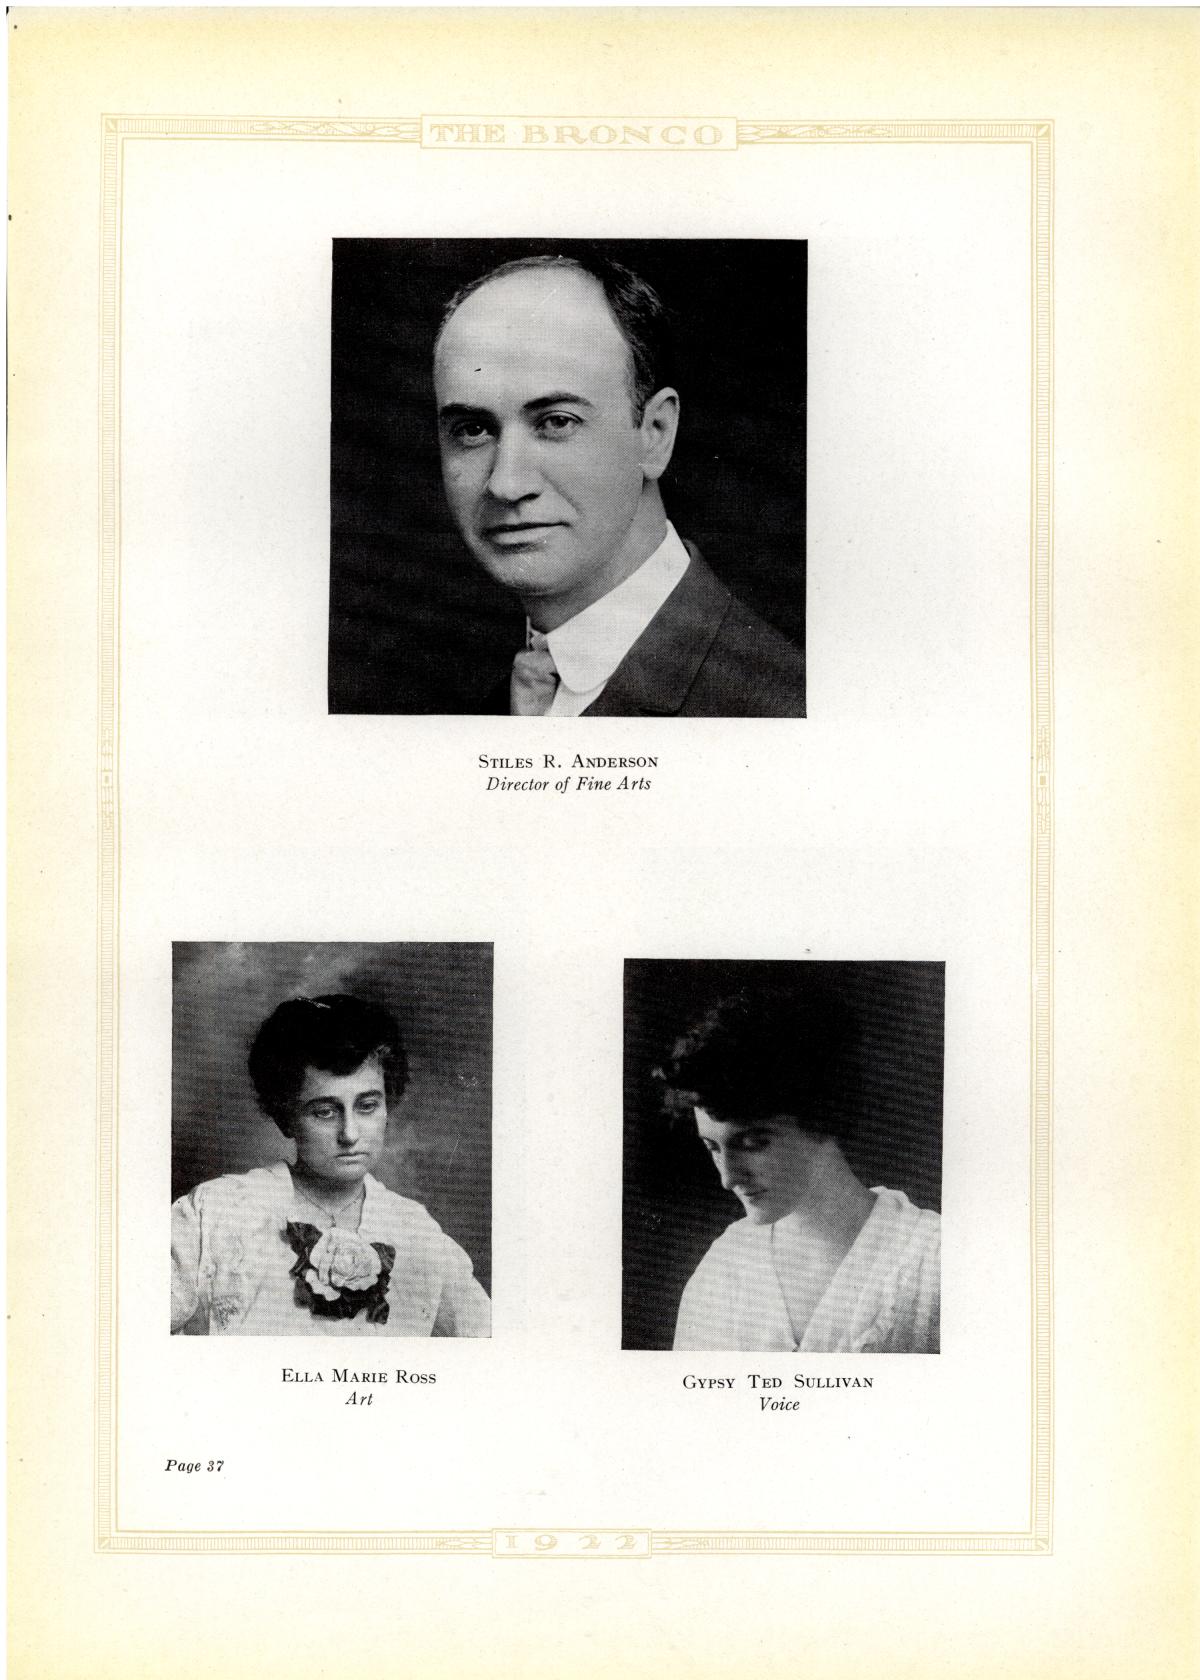 The Bronco, Yearbook of Simmons College, 1922
                                                
                                                    37
                                                